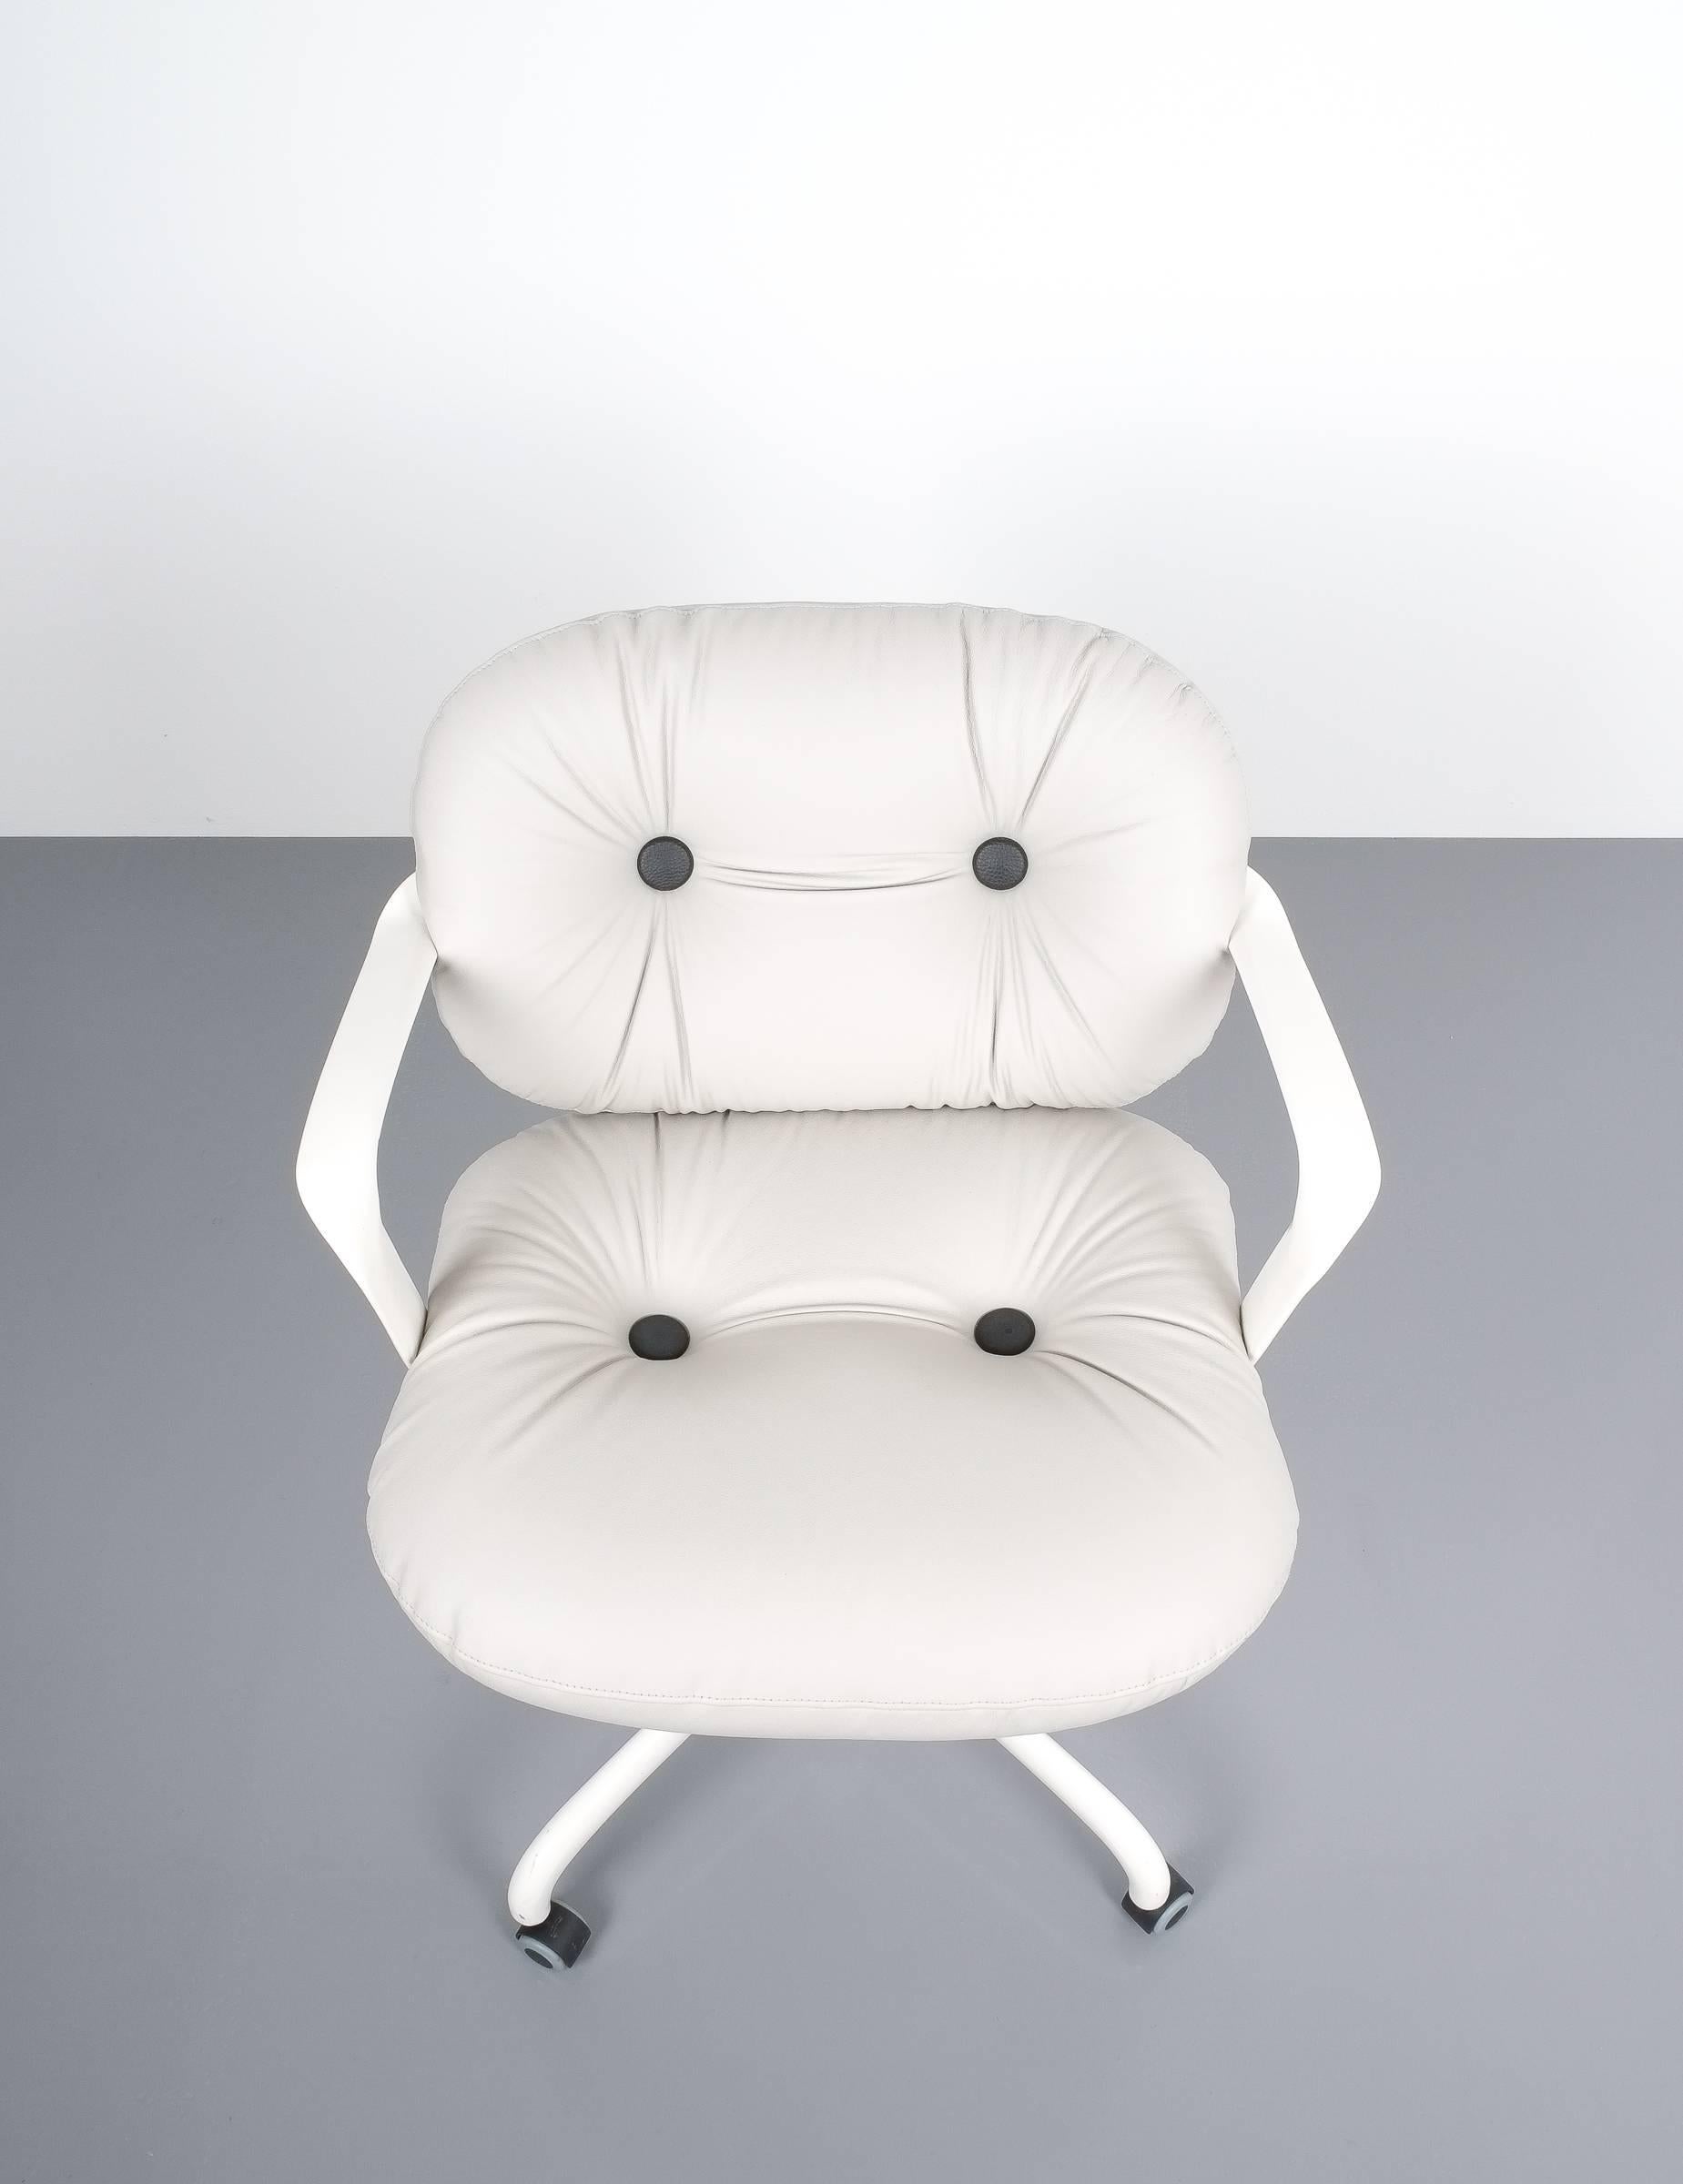 Late 20th Century Andrew Morrison and Bruce Hannah for Knoll Office Chair Grey Leather, 1975